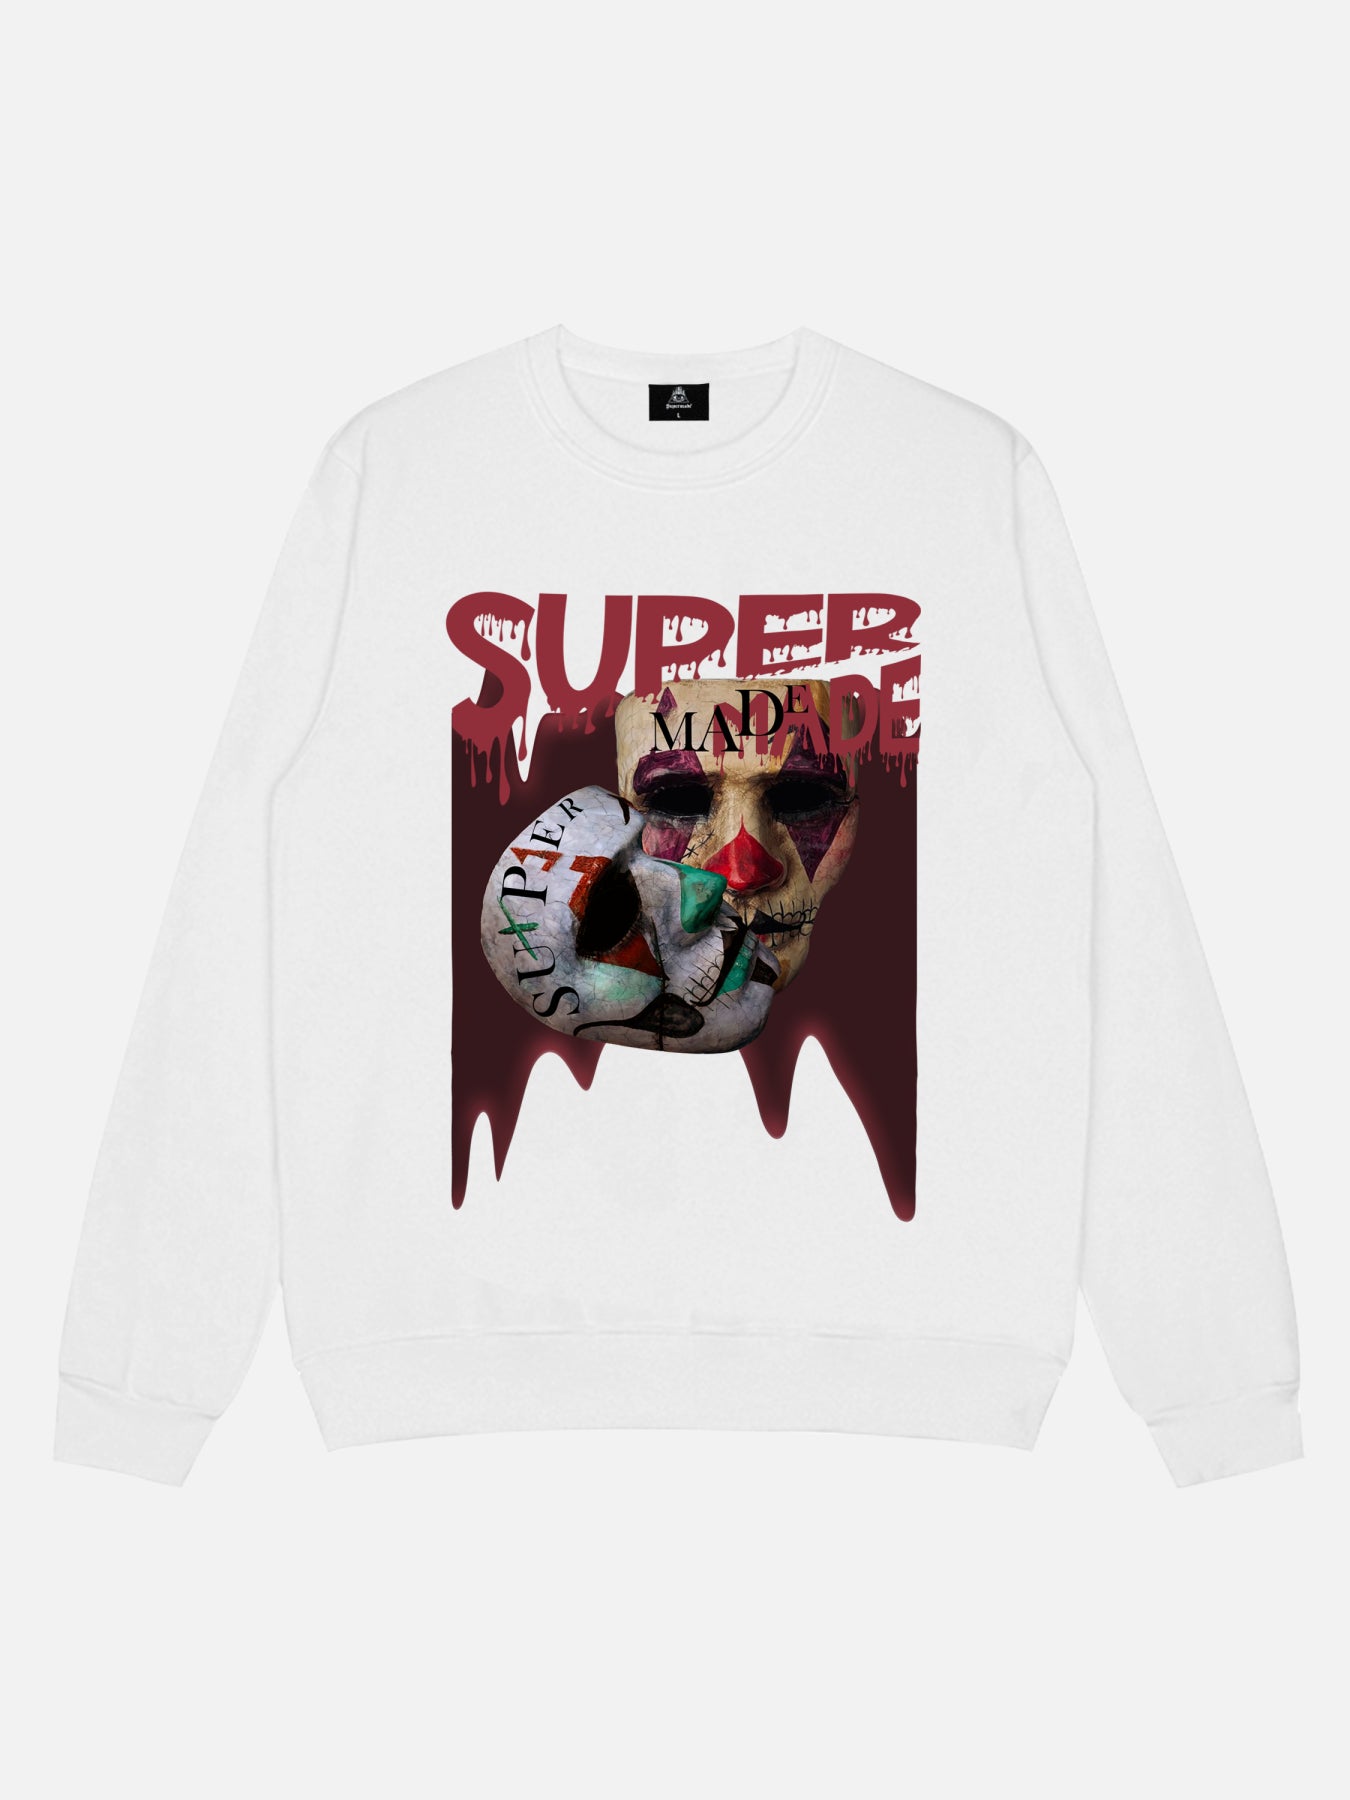 Thesupermade Logo Double Mask Printed Hoodie